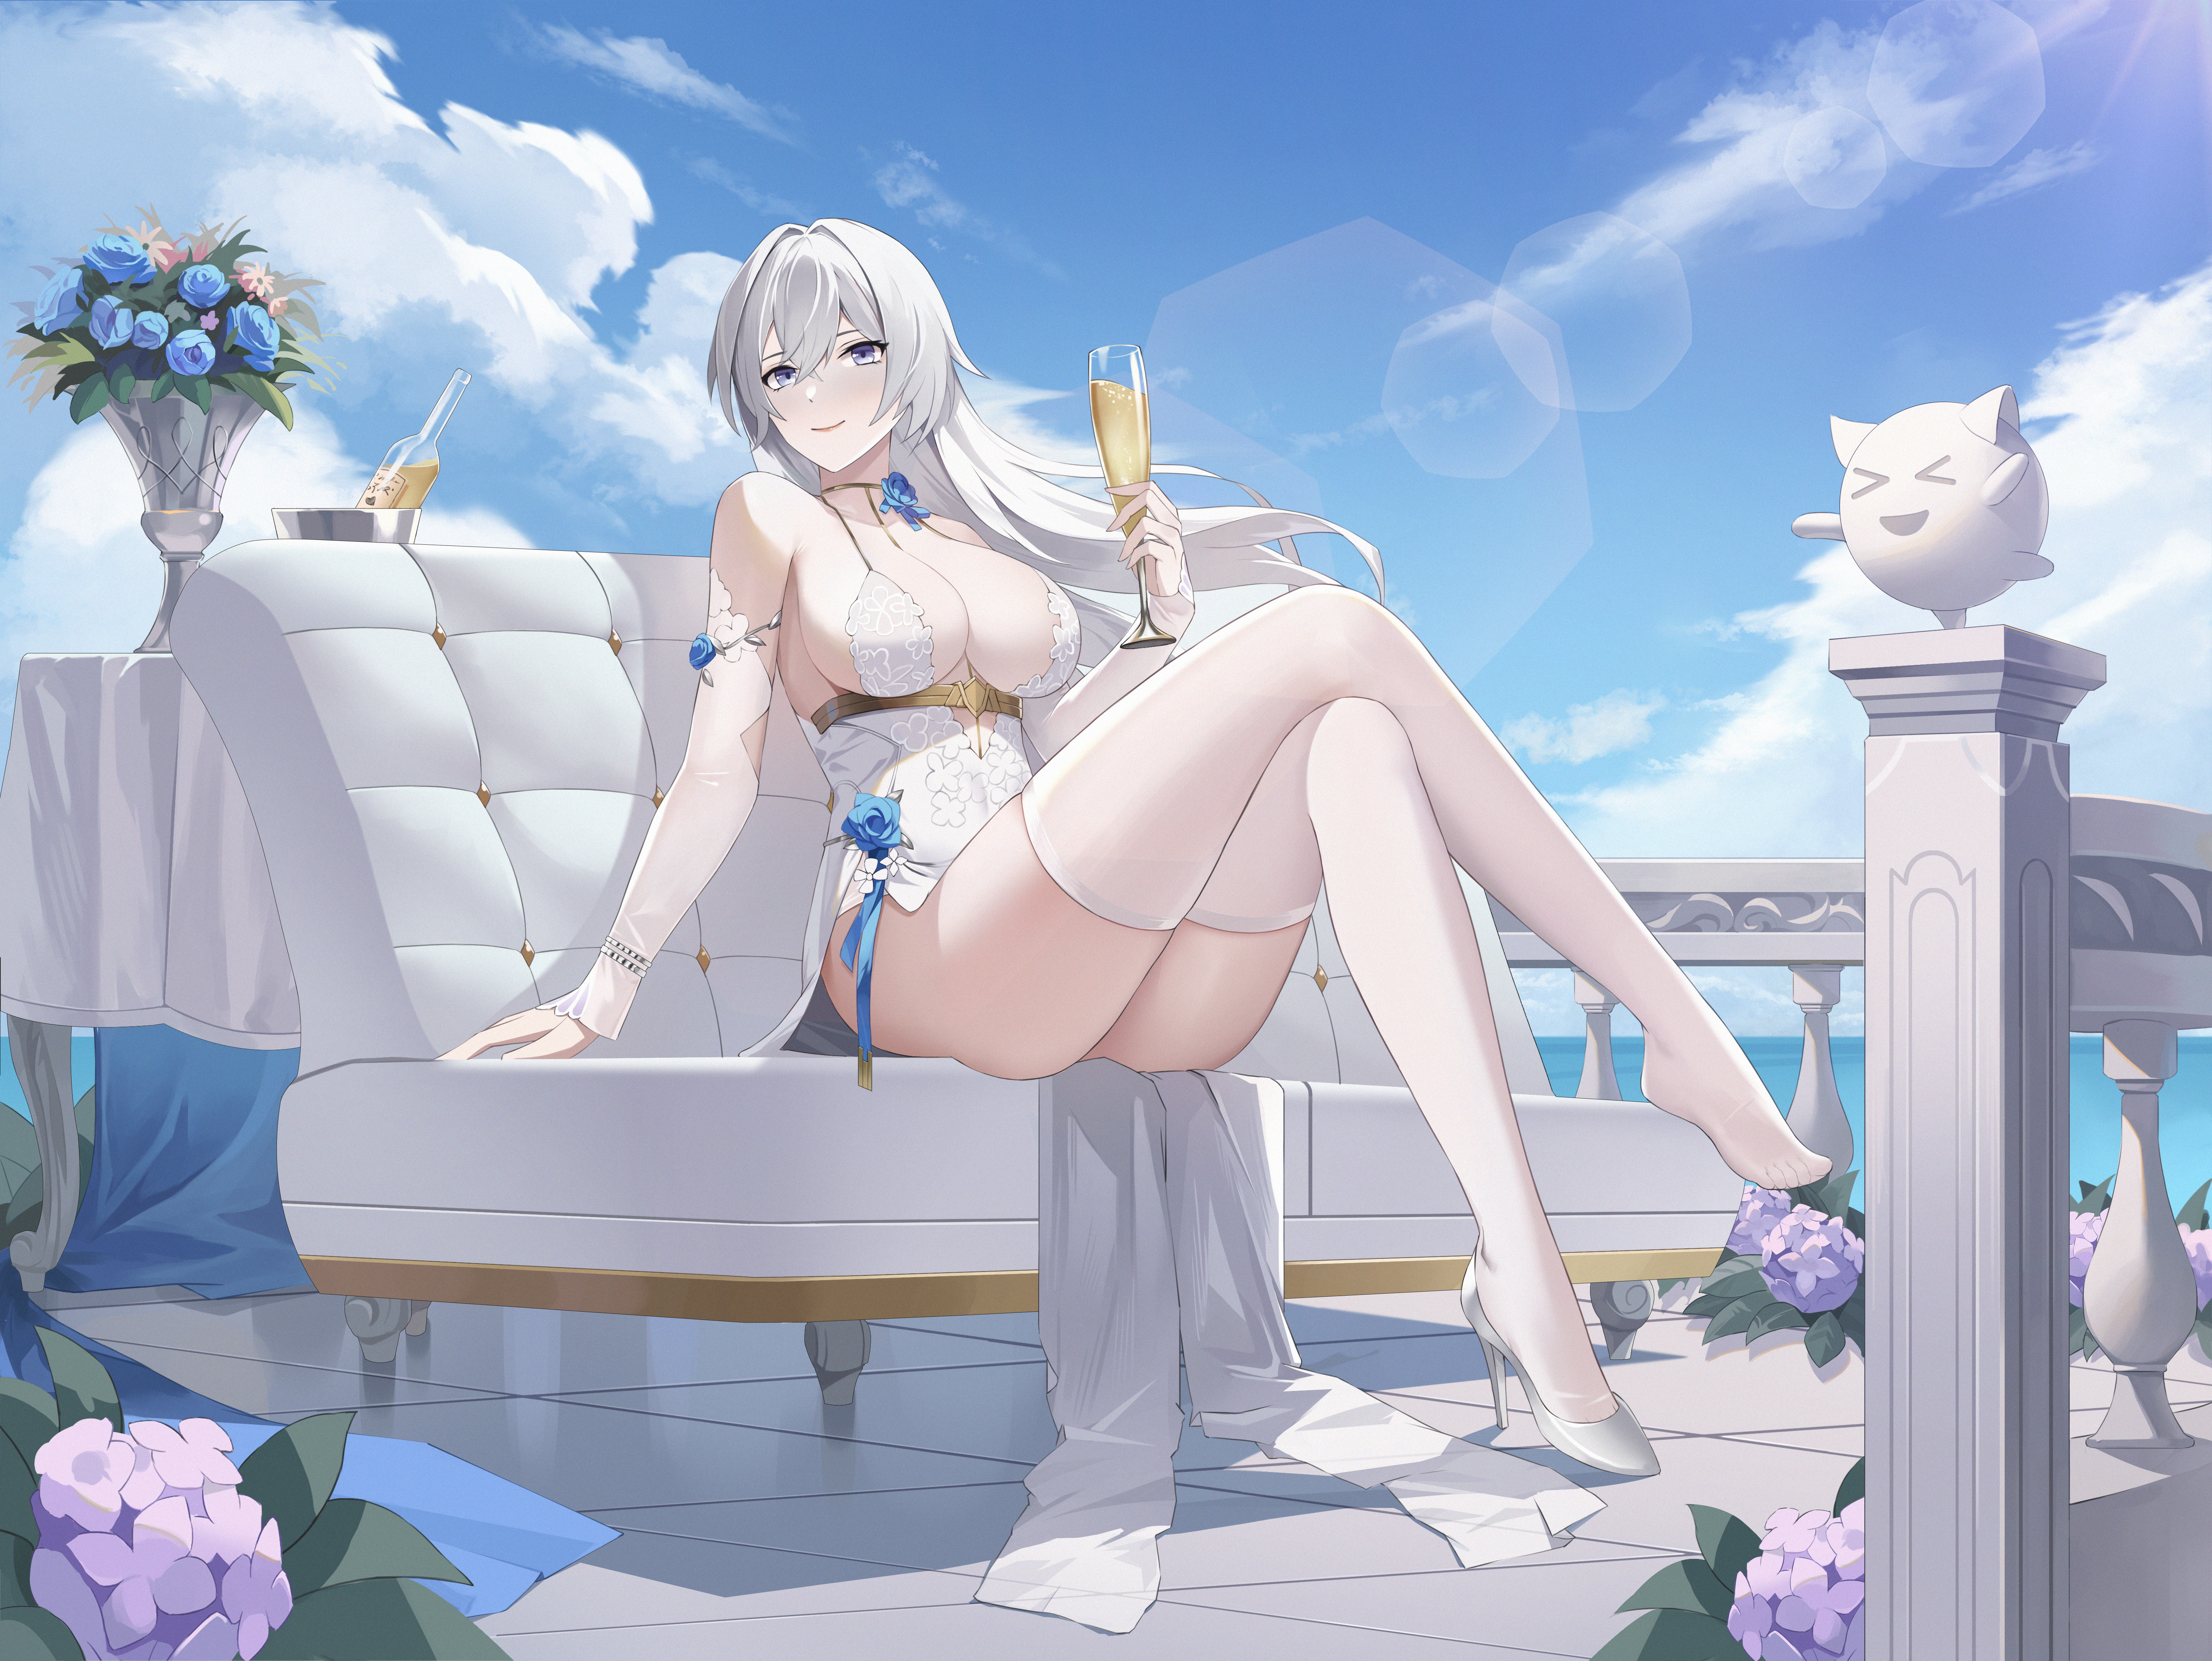 Anime 5783x4342 legs big boobs bra straps Aether Gazer sitting sky clouds heels flowers dress pointed toes smiling anime girls drinking glass champagne leaves looking at viewer long hair hair blowing in the wind wind couch table